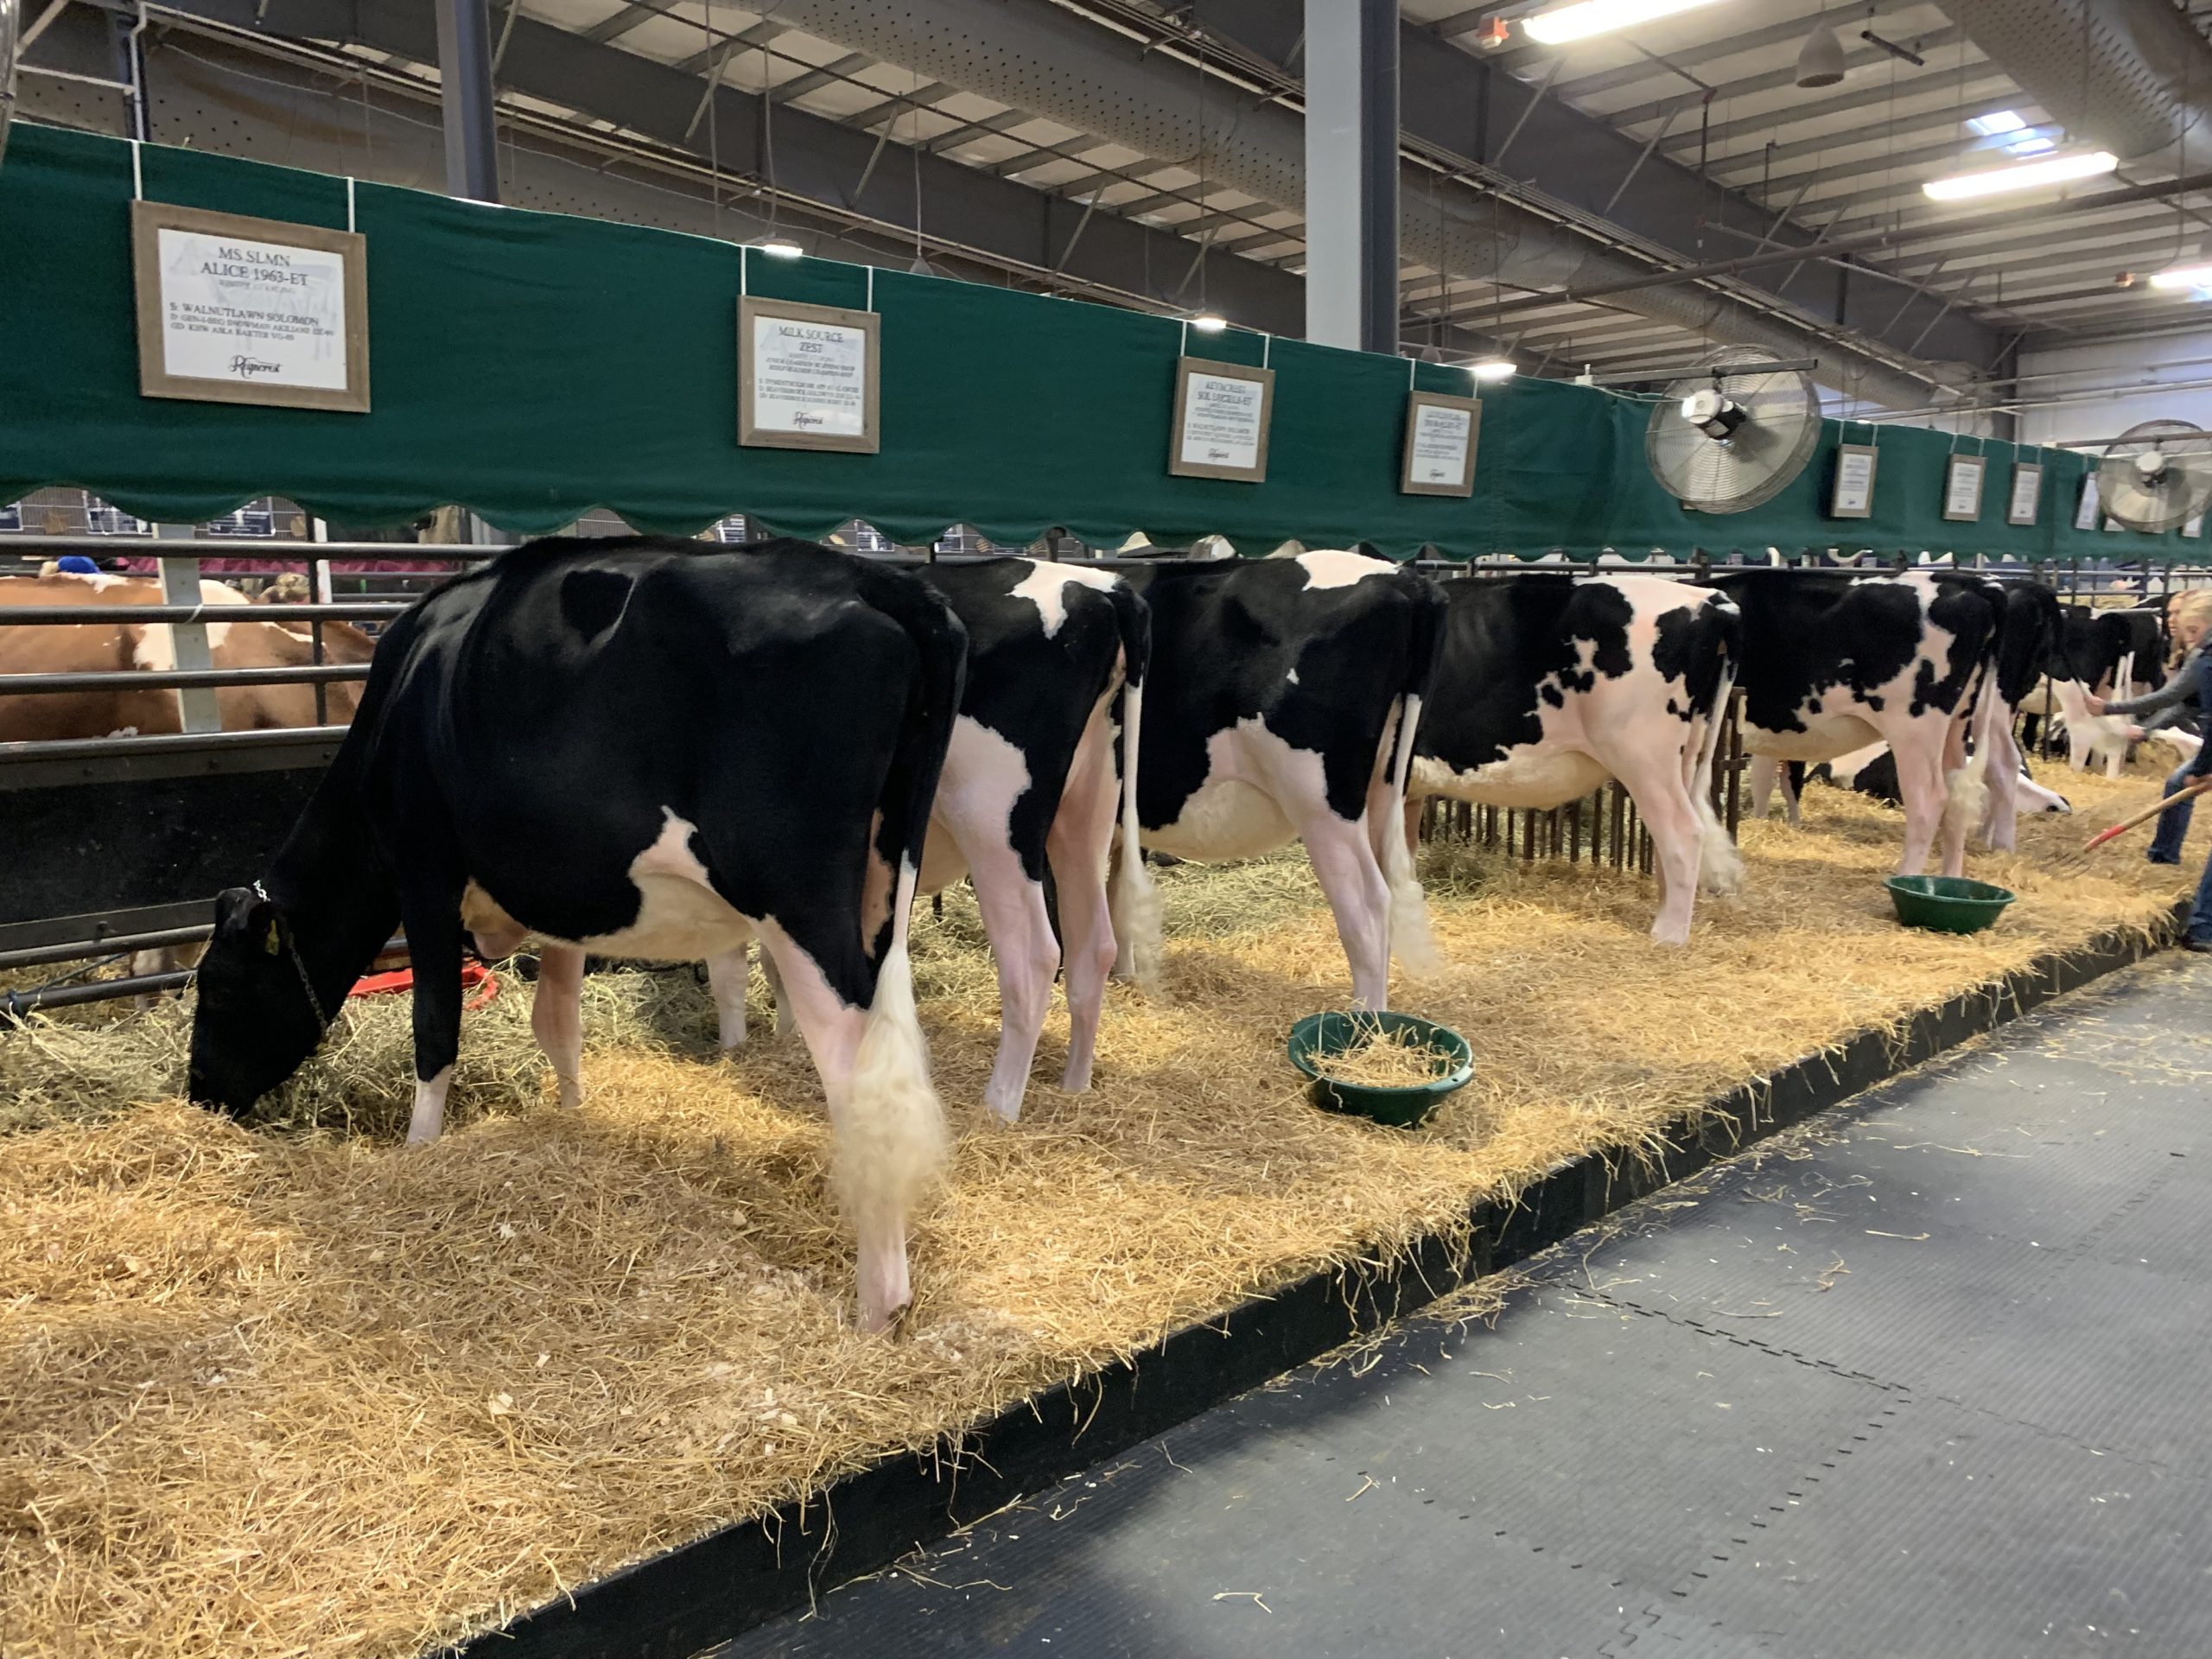 Dane County Offers 10 Year Contract Extension to Keep World Dairy Expo